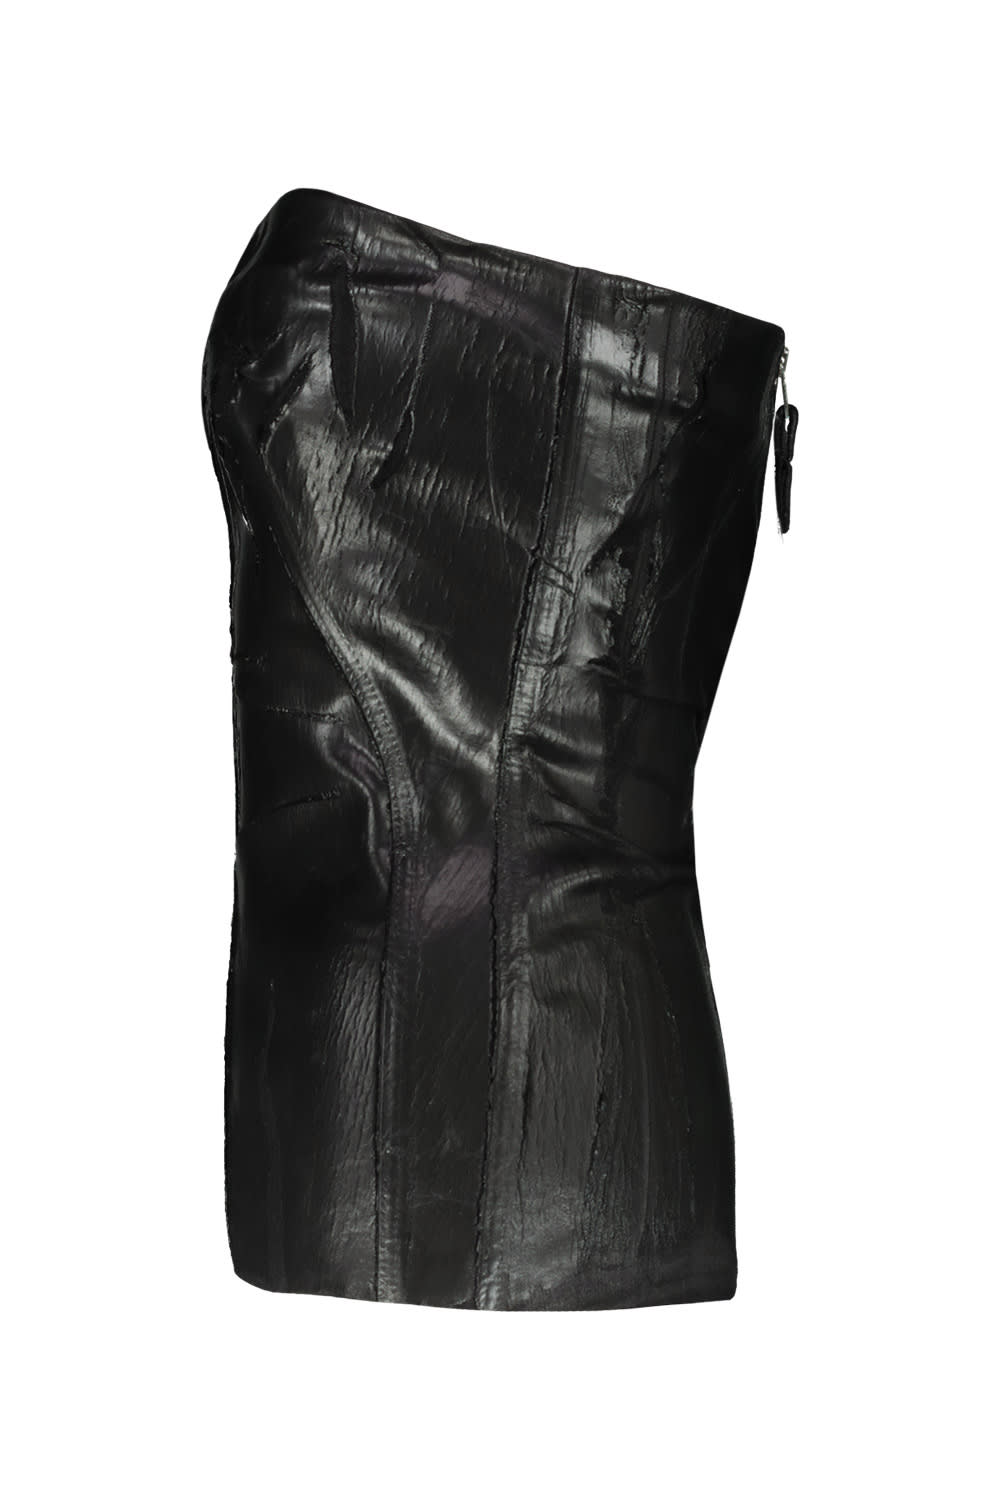 Rick Owens: Black Bustier Leather Tank Top